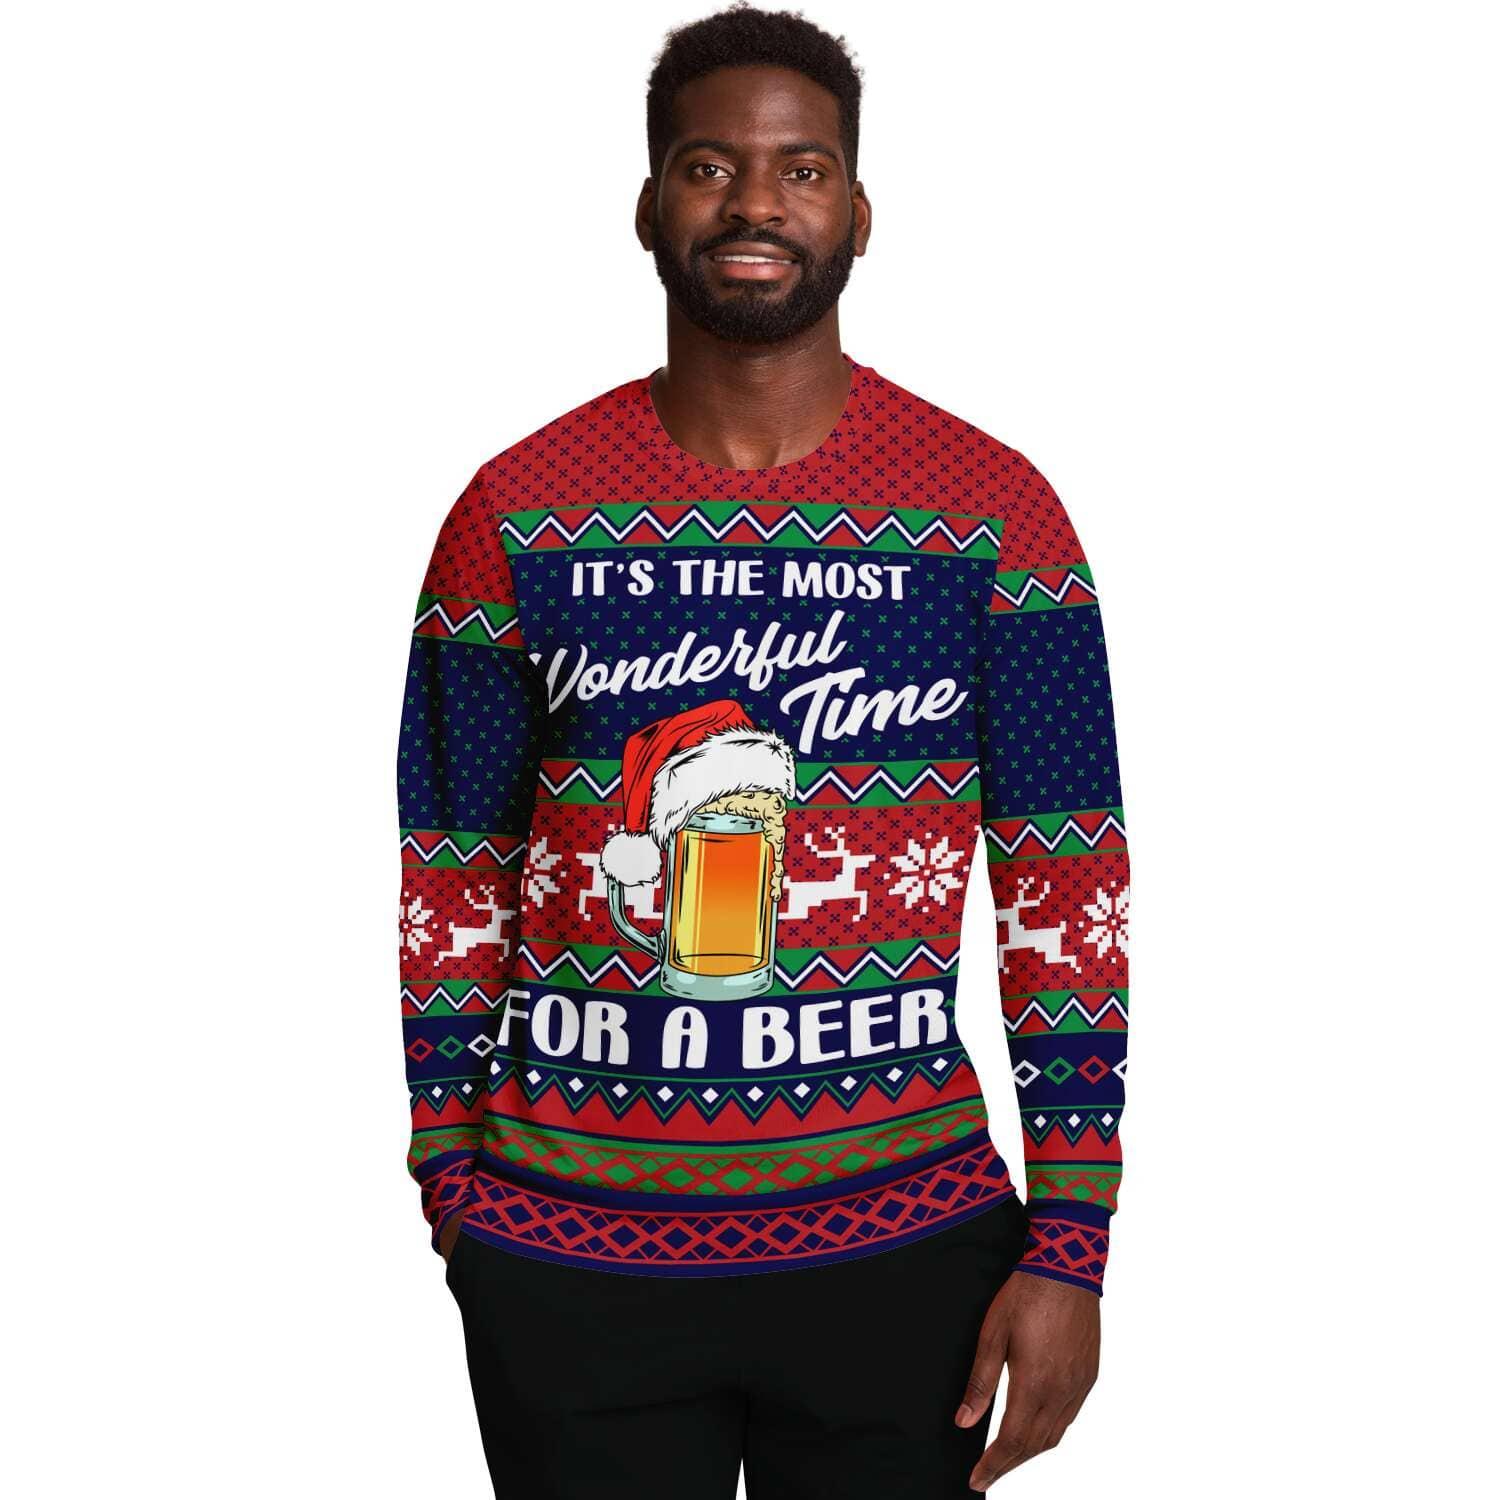 It's the most wonderful time for Beer Unisex Ugly Christmas Sweater - TopKoalaTee